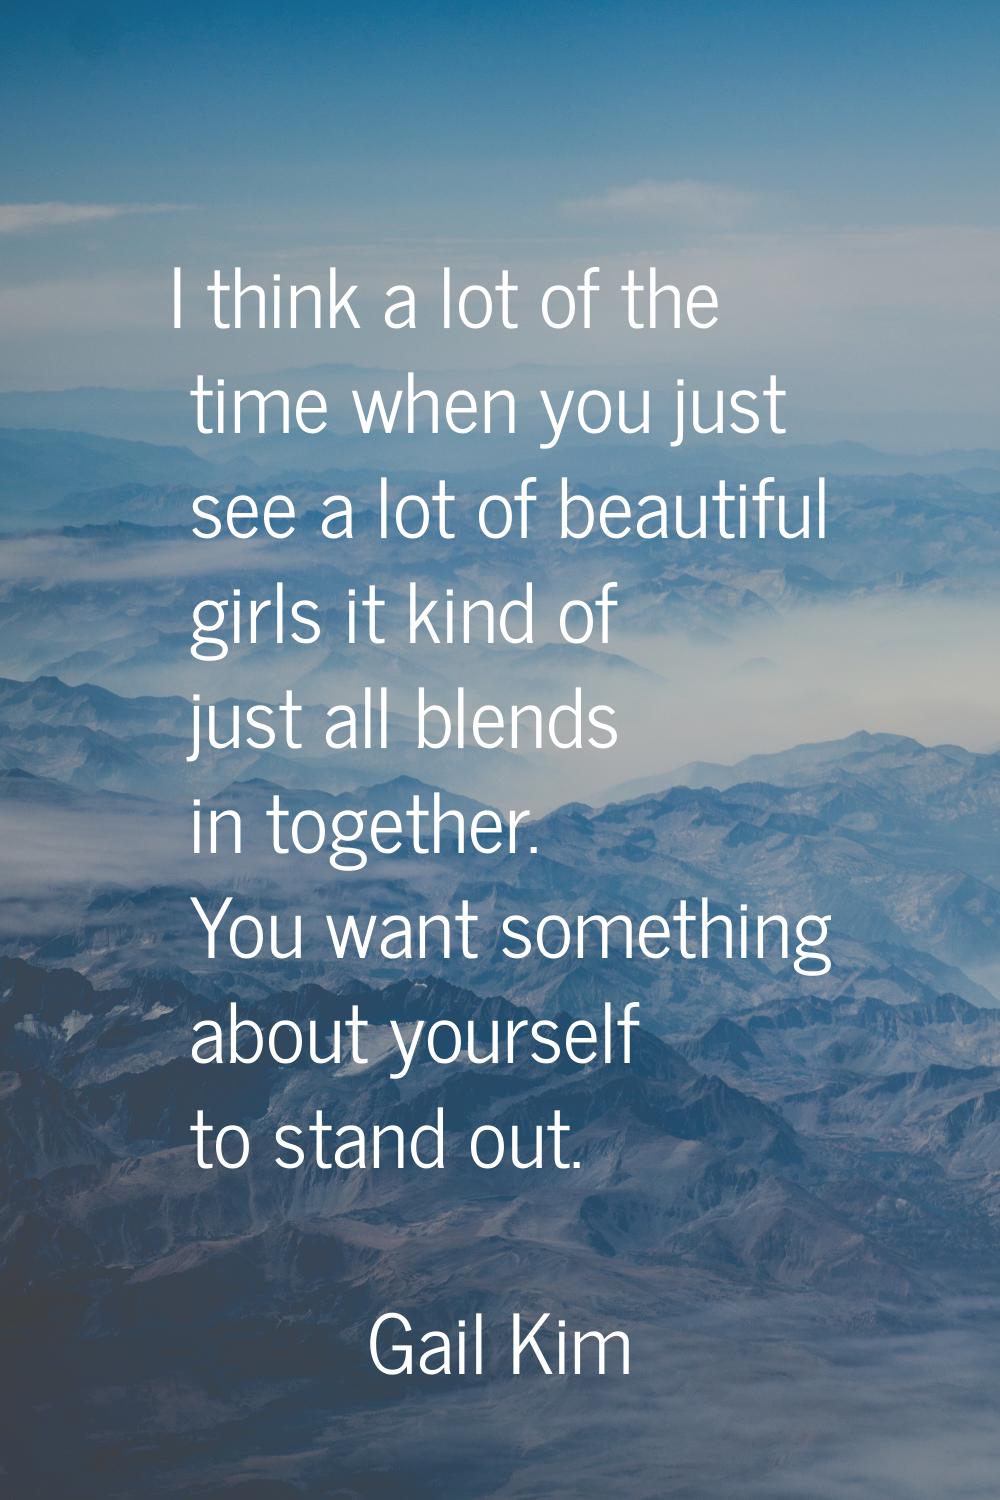 I think a lot of the time when you just see a lot of beautiful girls it kind of just all blends in 